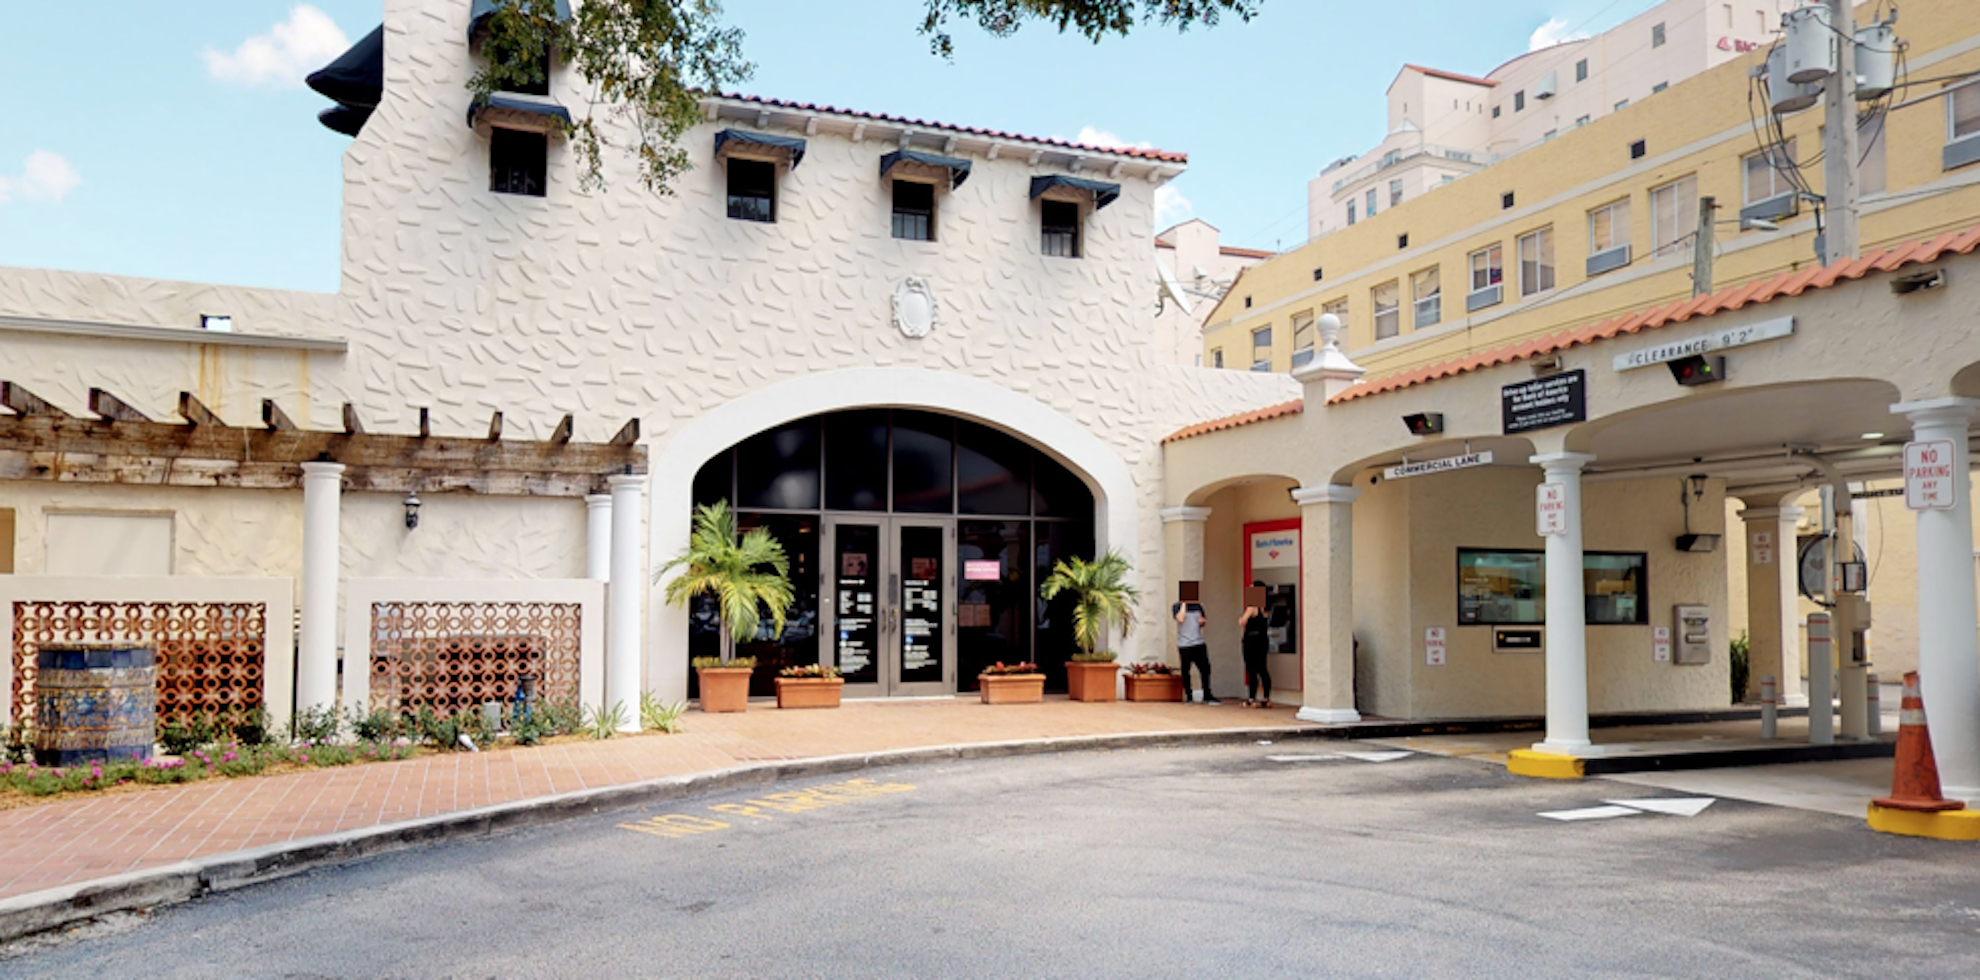 Bank of America financial center with drive-thru ATM and teller | 2308 Ponce De Leon Blvd, Coral Gables, FL 33134